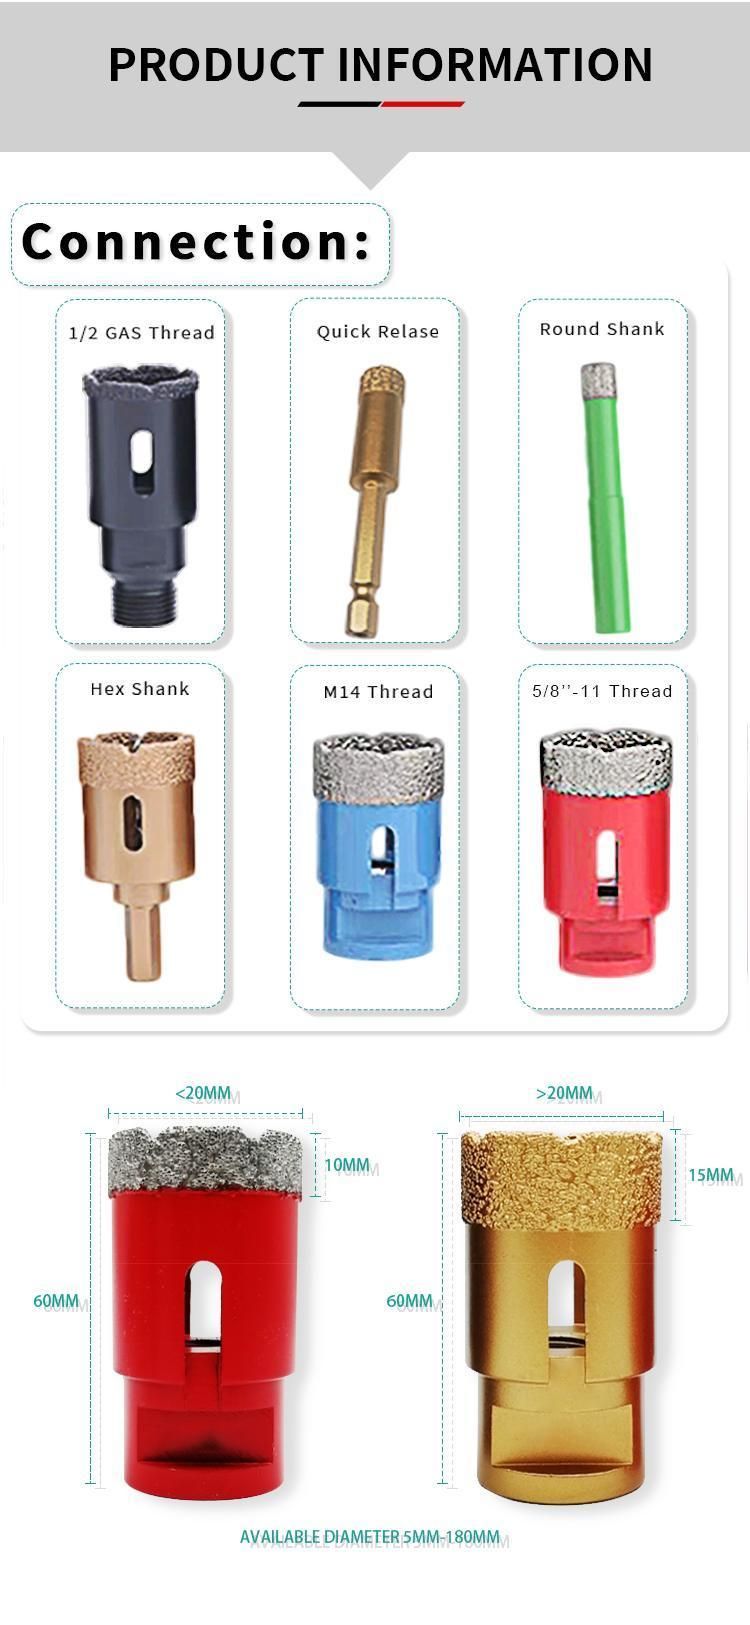 6 mm Hex Shank Tile Drilling Tools Dry Diamond Core Drill Bits for Porcelain Ceramic Marble